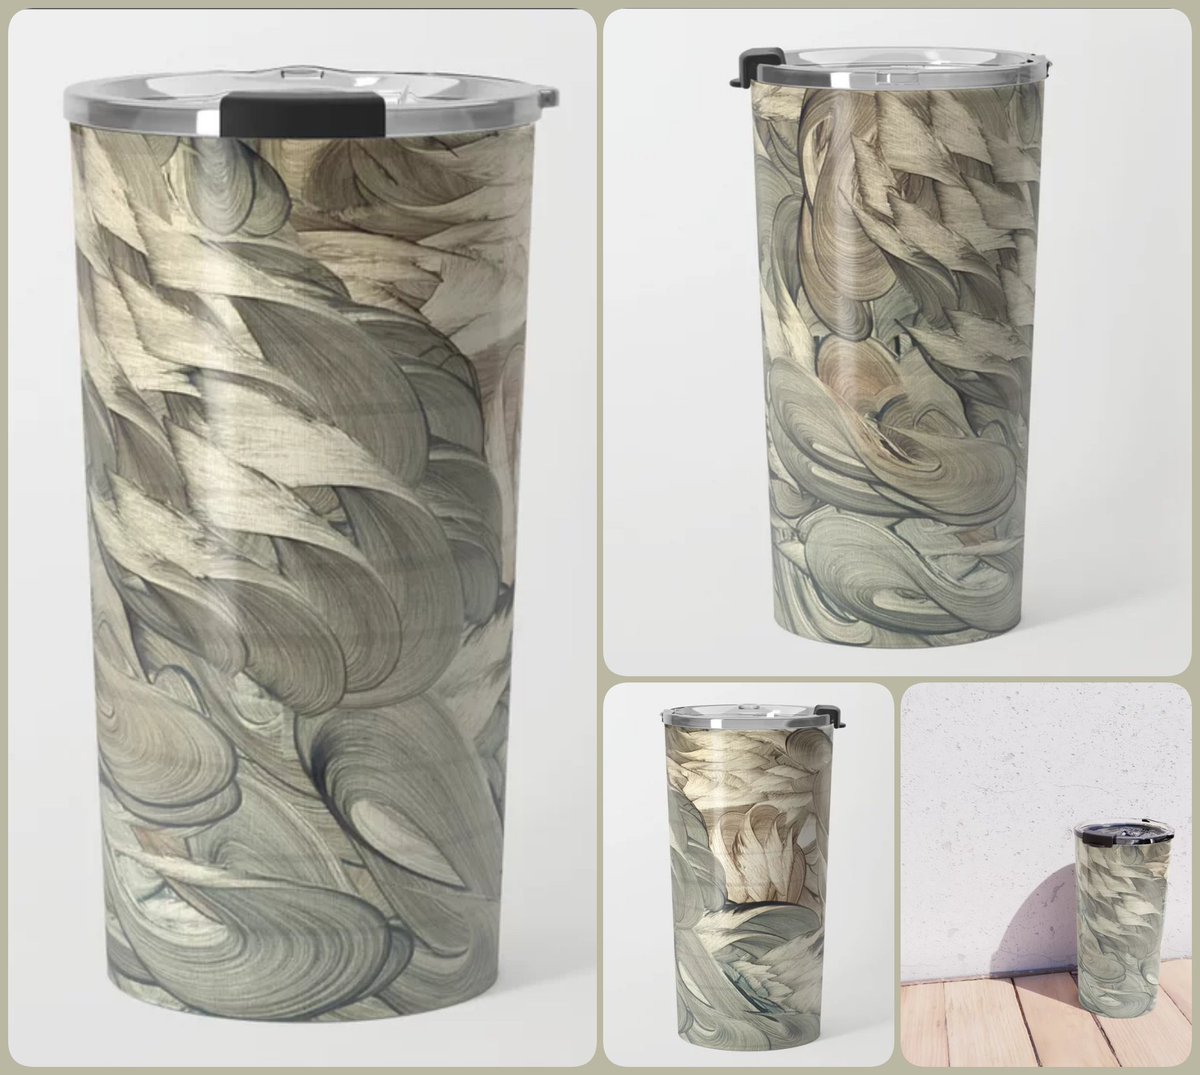 Elves Travel Mug~by Art_Falaxy ~Art Exquisite!~ #coasters #gifts #trays #mugs #coffee #society6 #travel #artfalaxy #art #accents #modern #trendy #wine #water #placemats #tablecloths #runners #blue #gray society6.com/product/elves8…